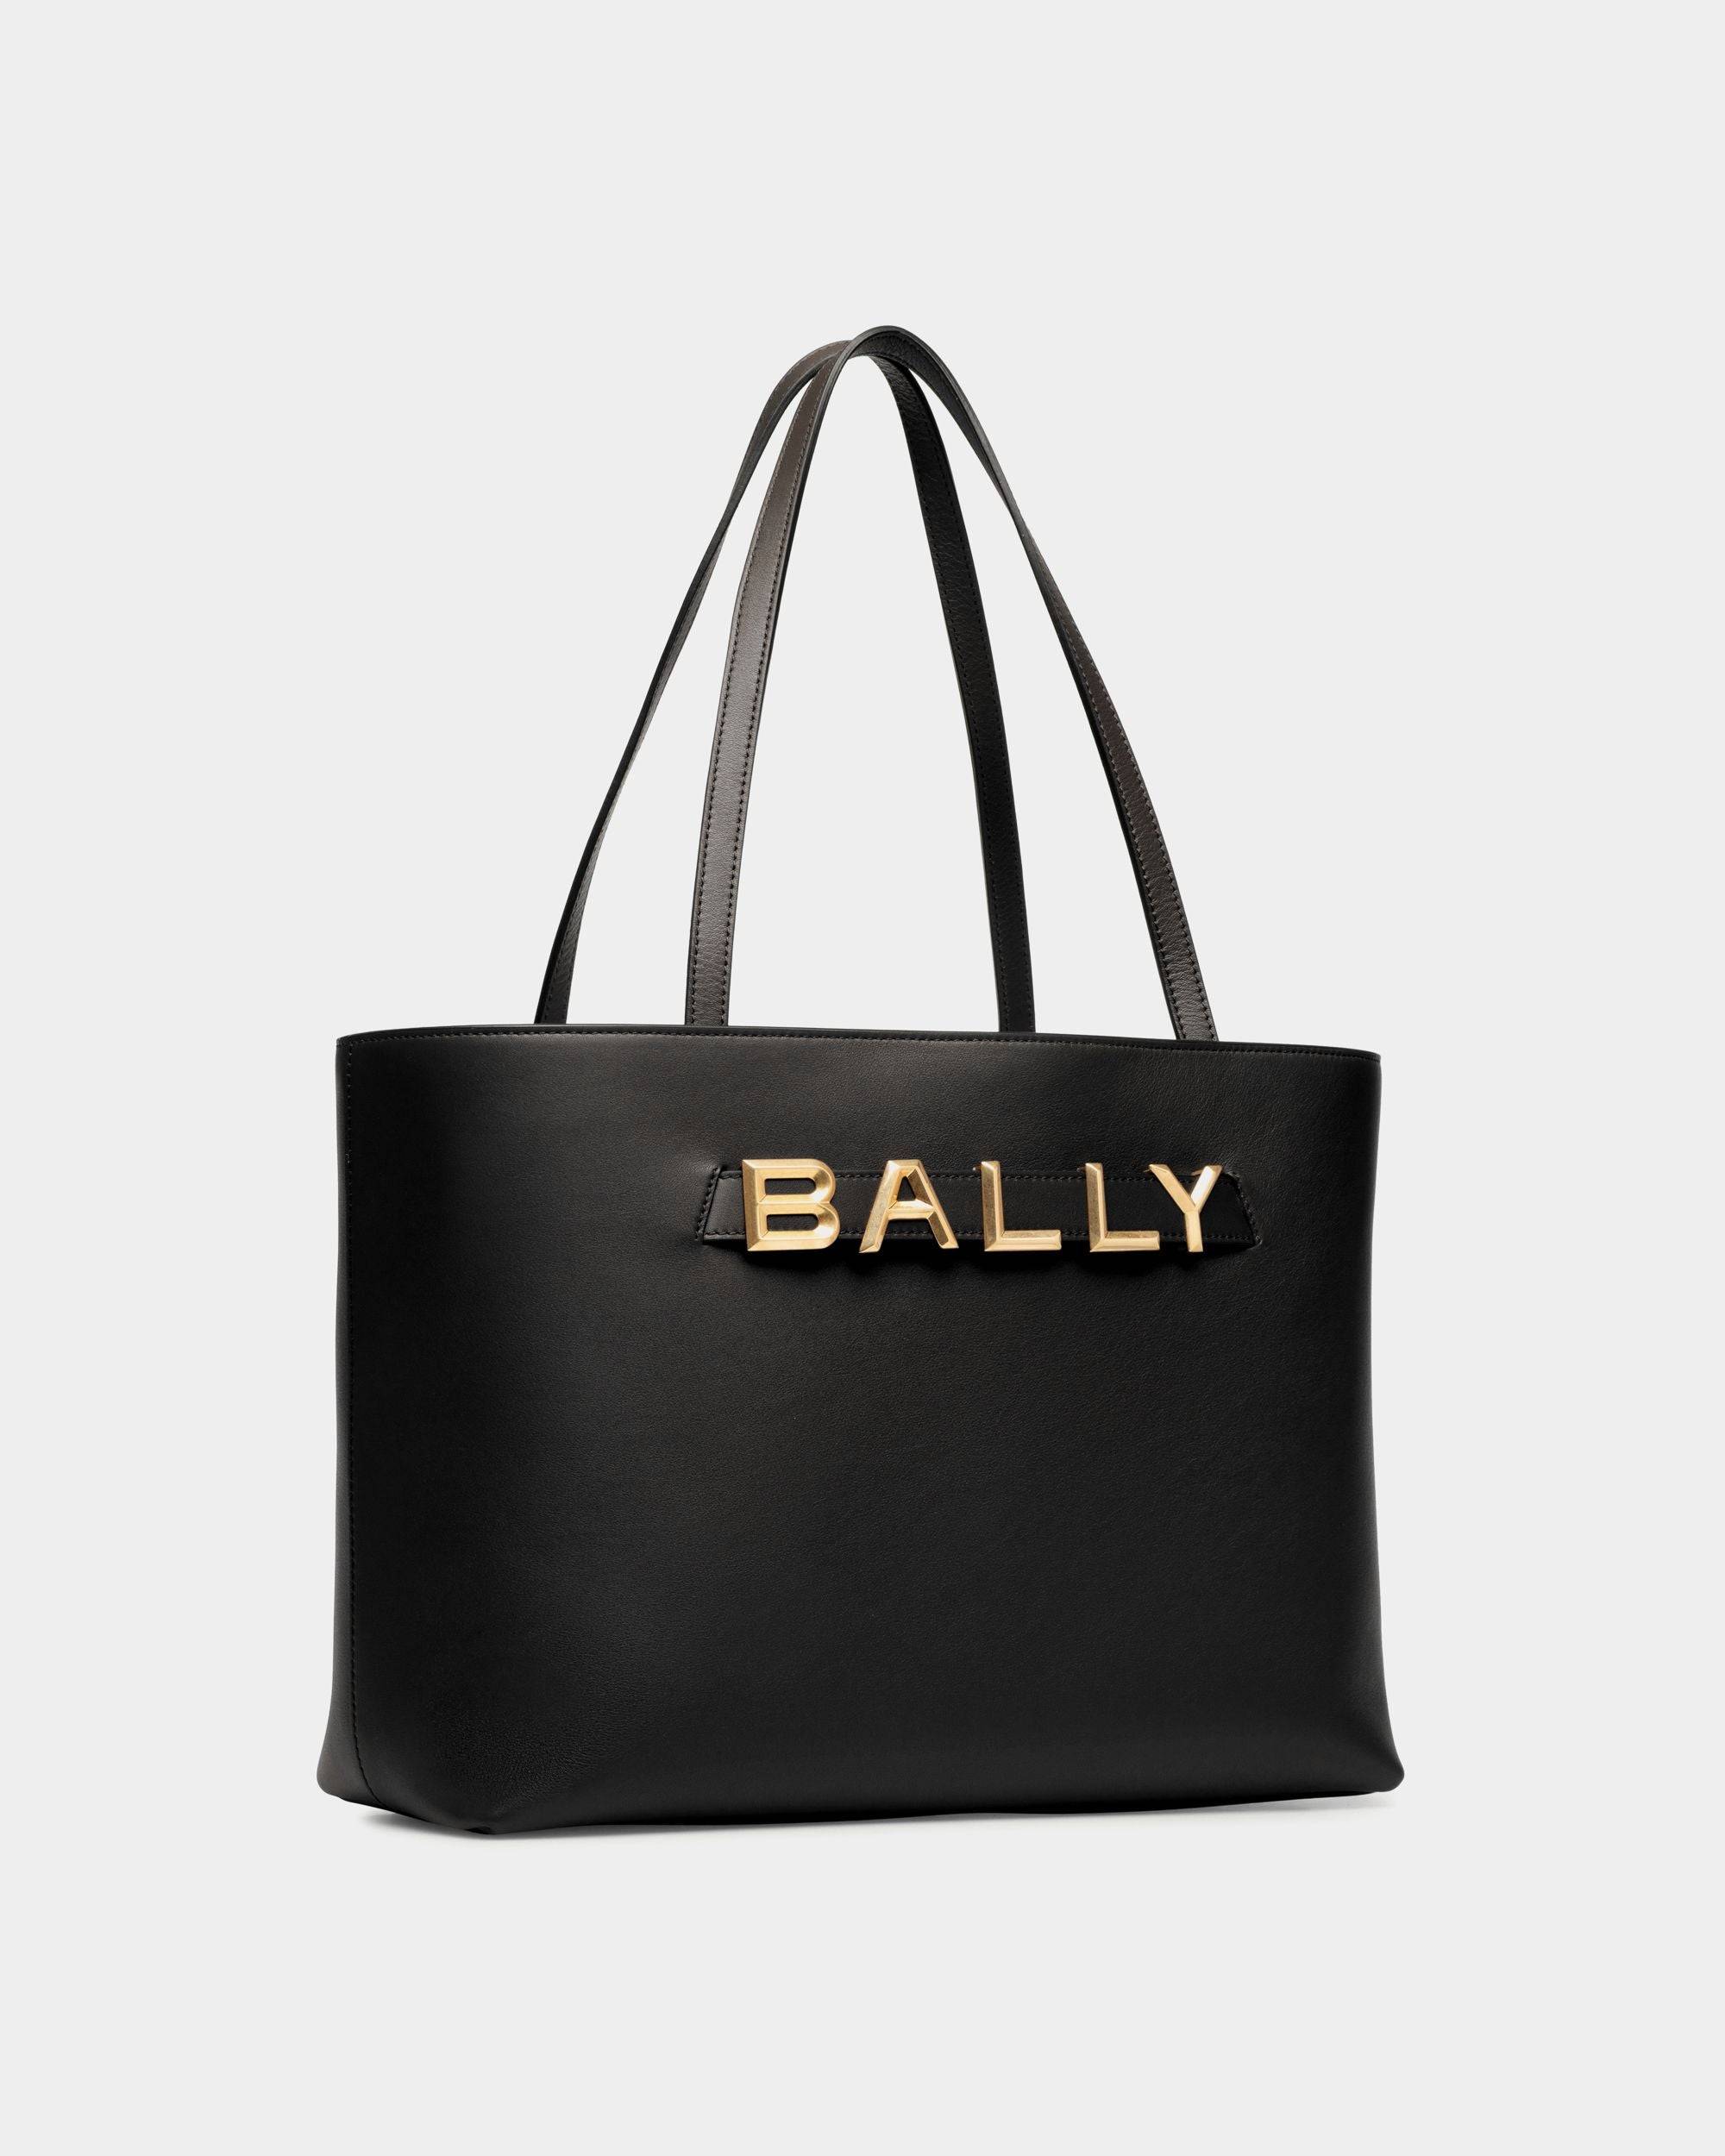 Bally Spell | Women's Tote Bag in Black Leather | Bally | Still Life 3/4 Front